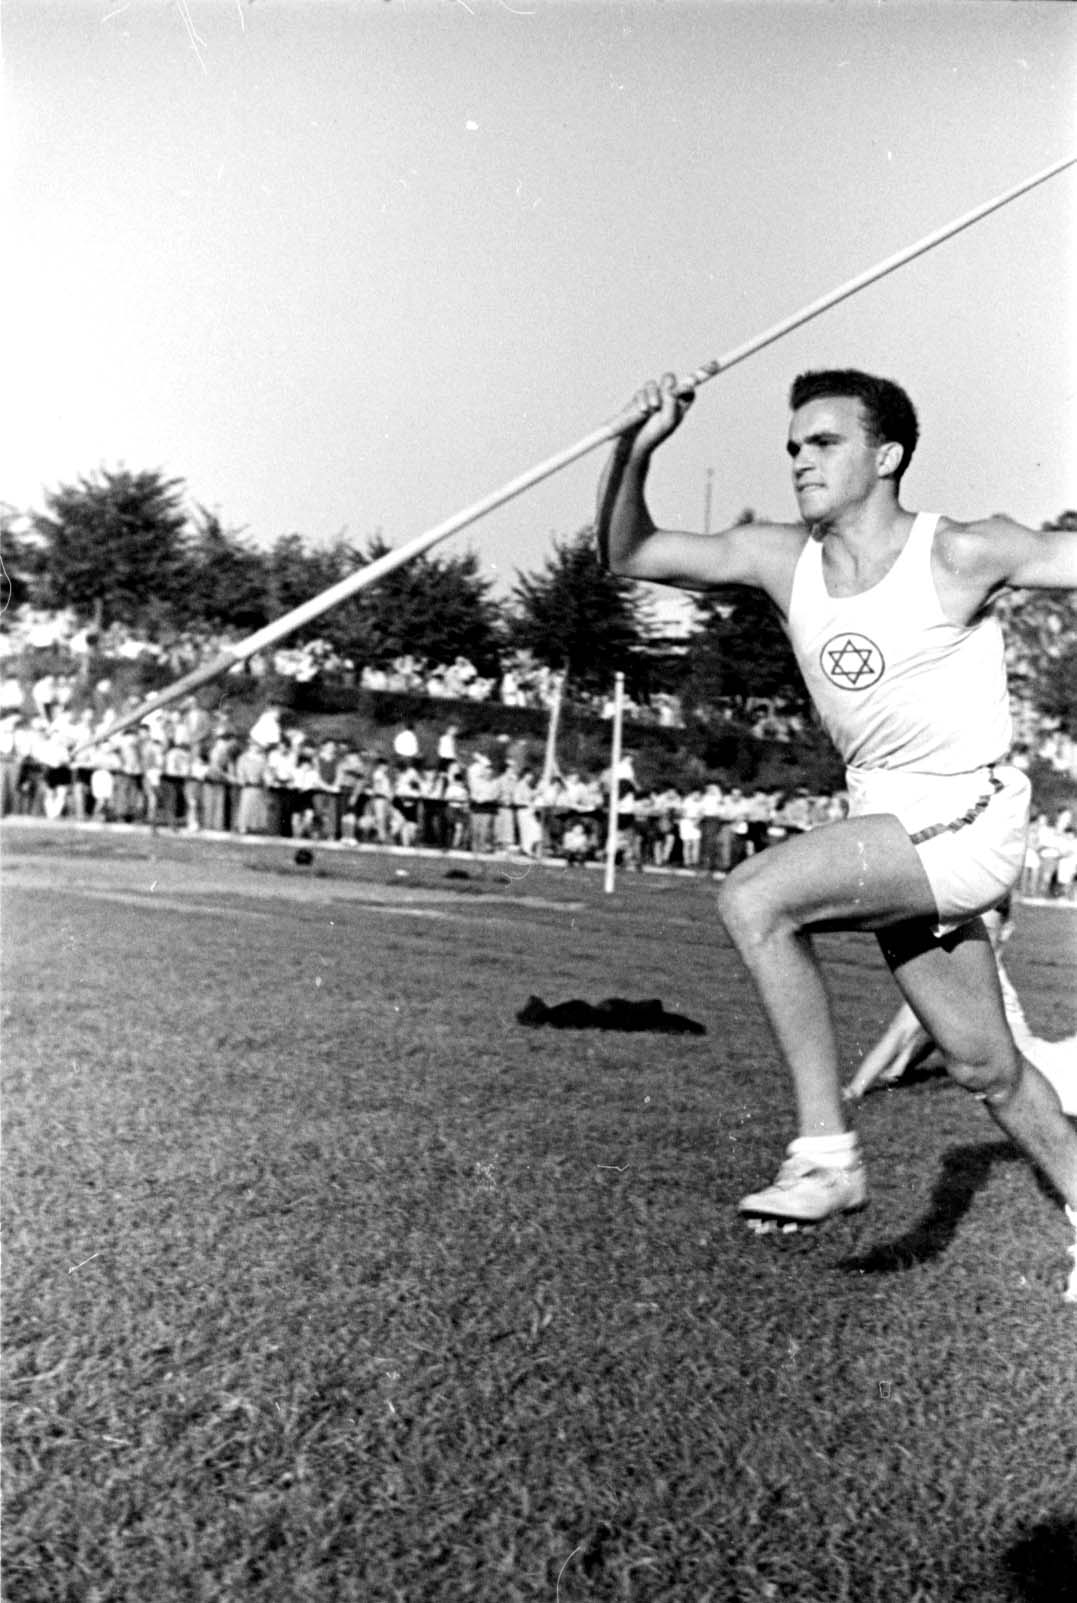 Berlin, Germany, August 1937, a javelin event at a "Maccabi" track and field competition